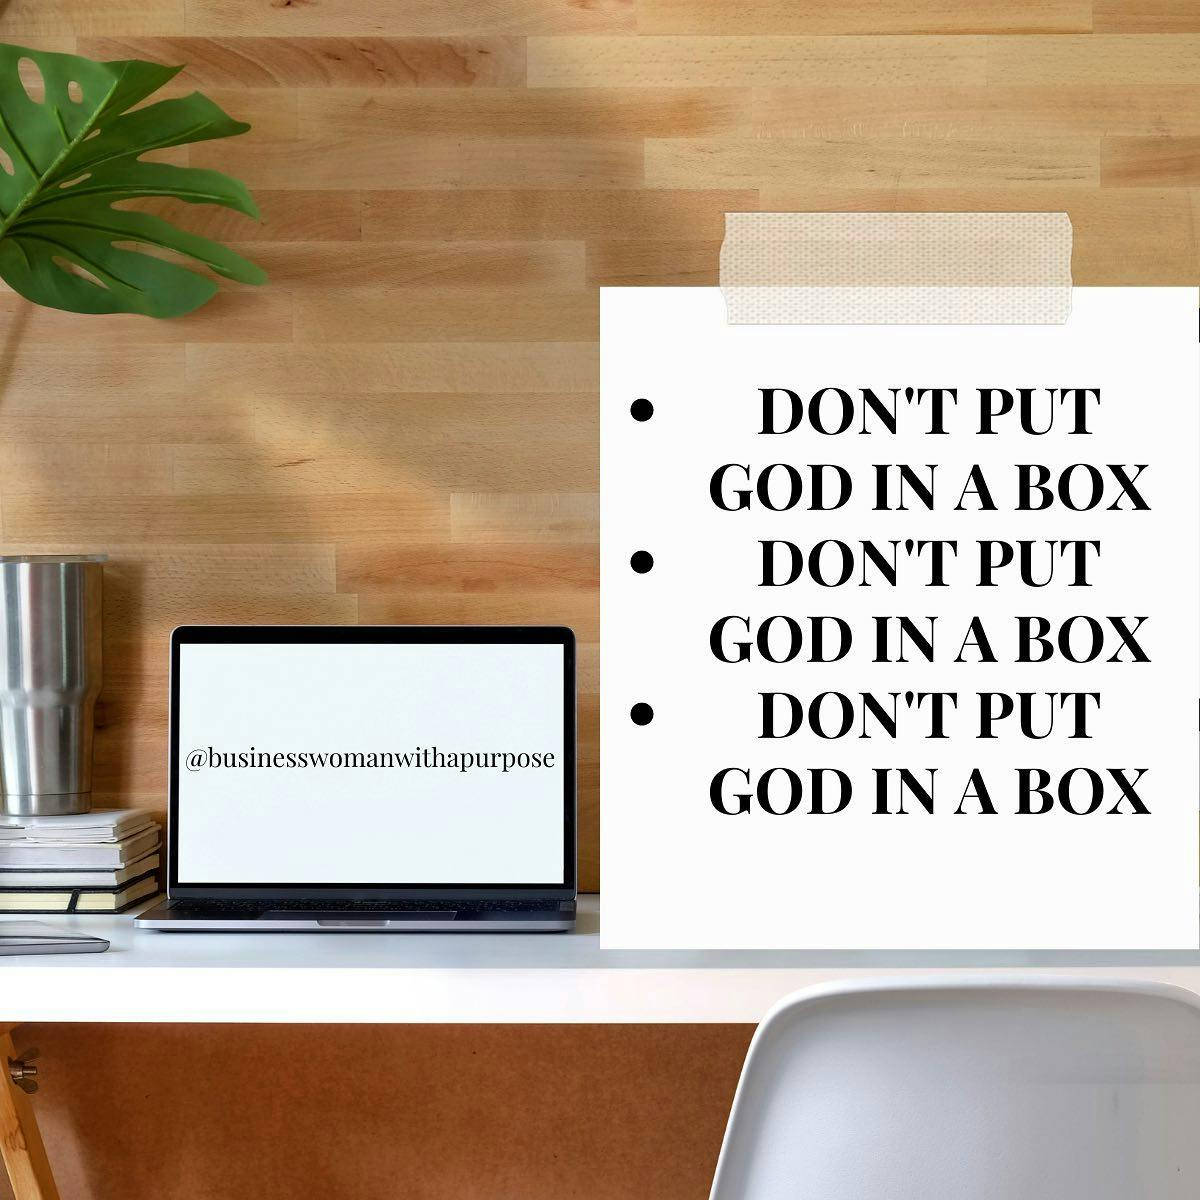 Don’t put God in a box by holding onto an idea about how you think your life should look. God can do WAY more in your life than you could ever imagine. Let God surprise you on what He can do. God gives the best surprises, so get excited!